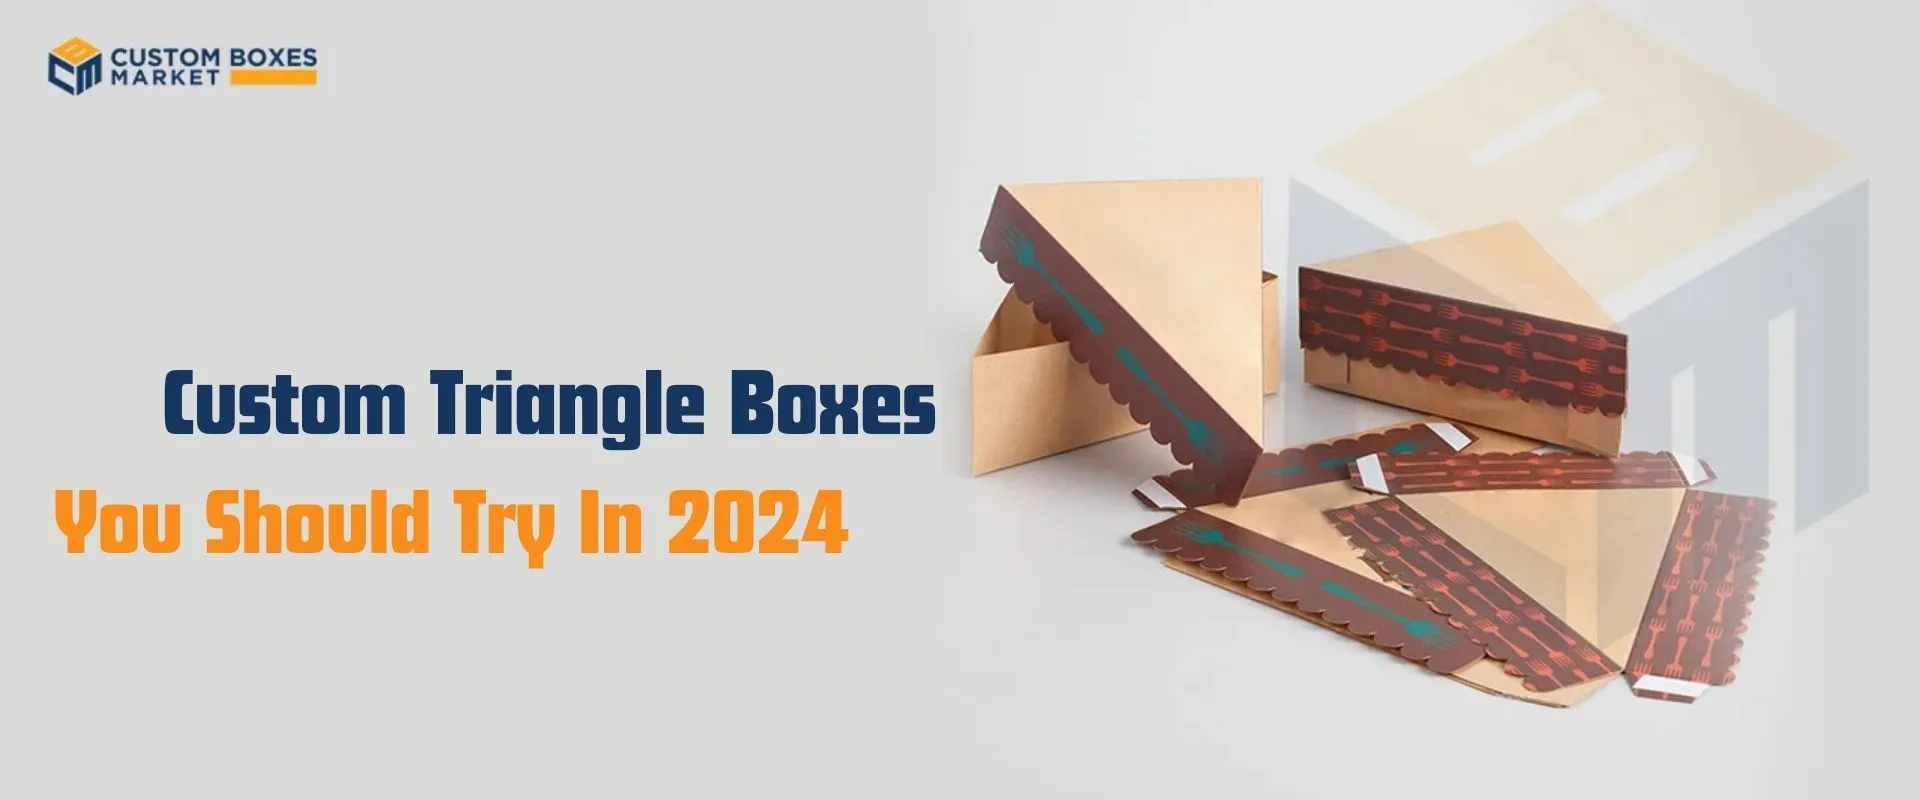 Custom Triangle Boxes You Should Try In 2024